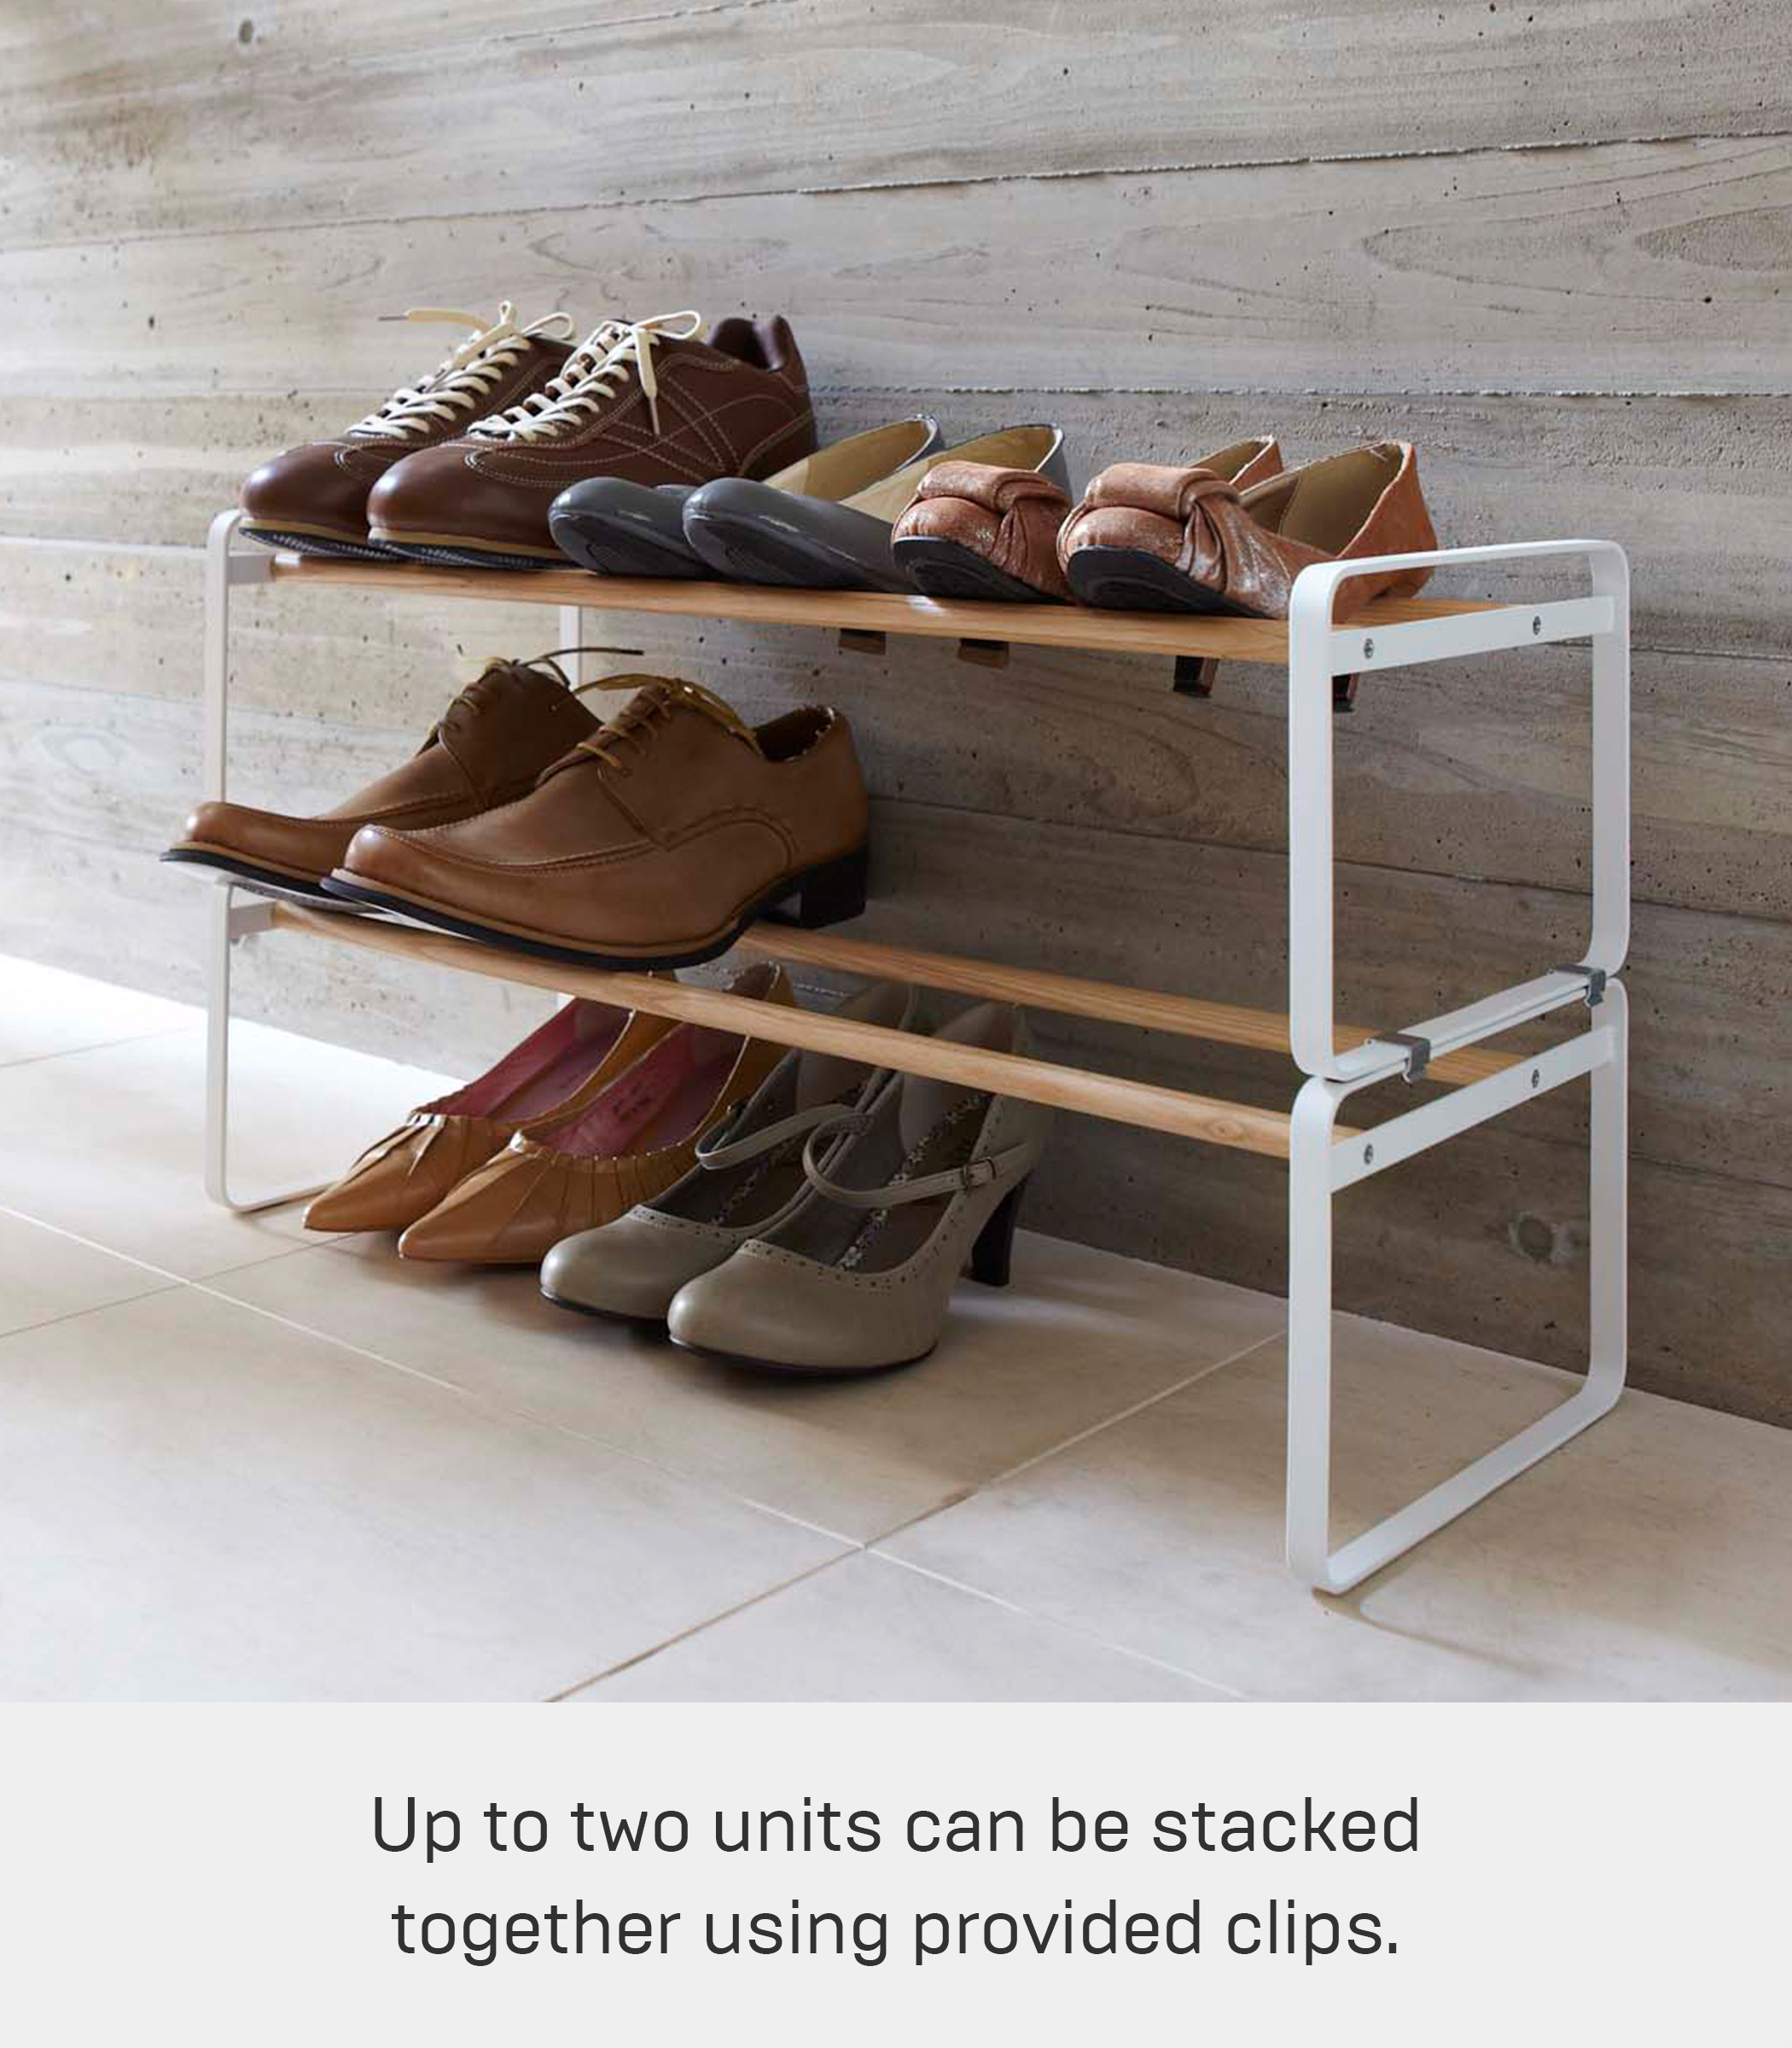 Yamazaki Home Stackable Shoe Rack, White, Steel,  Holds up to 4 pairs of shoes per shelf, Supports 6.6 pounds, Stackable - image 4 of 5